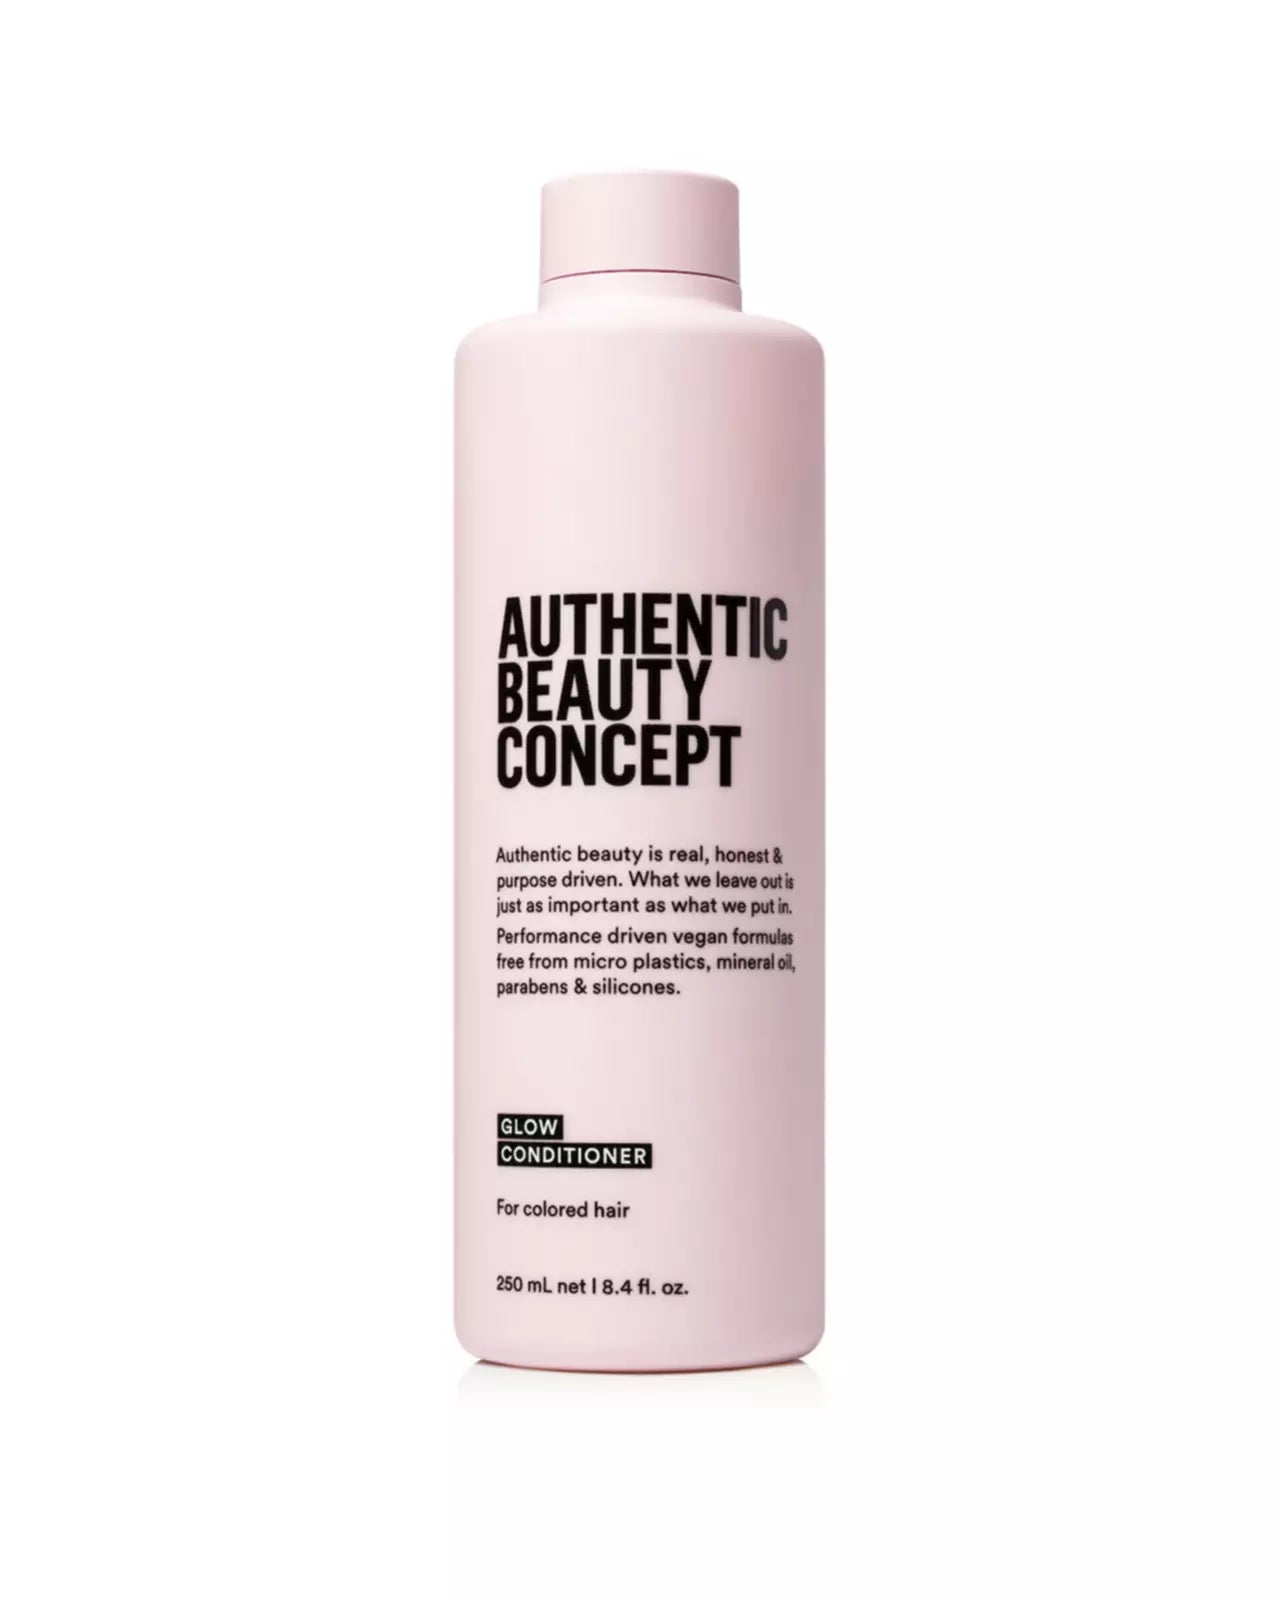 Authentic Beauty Concept glow conditioner